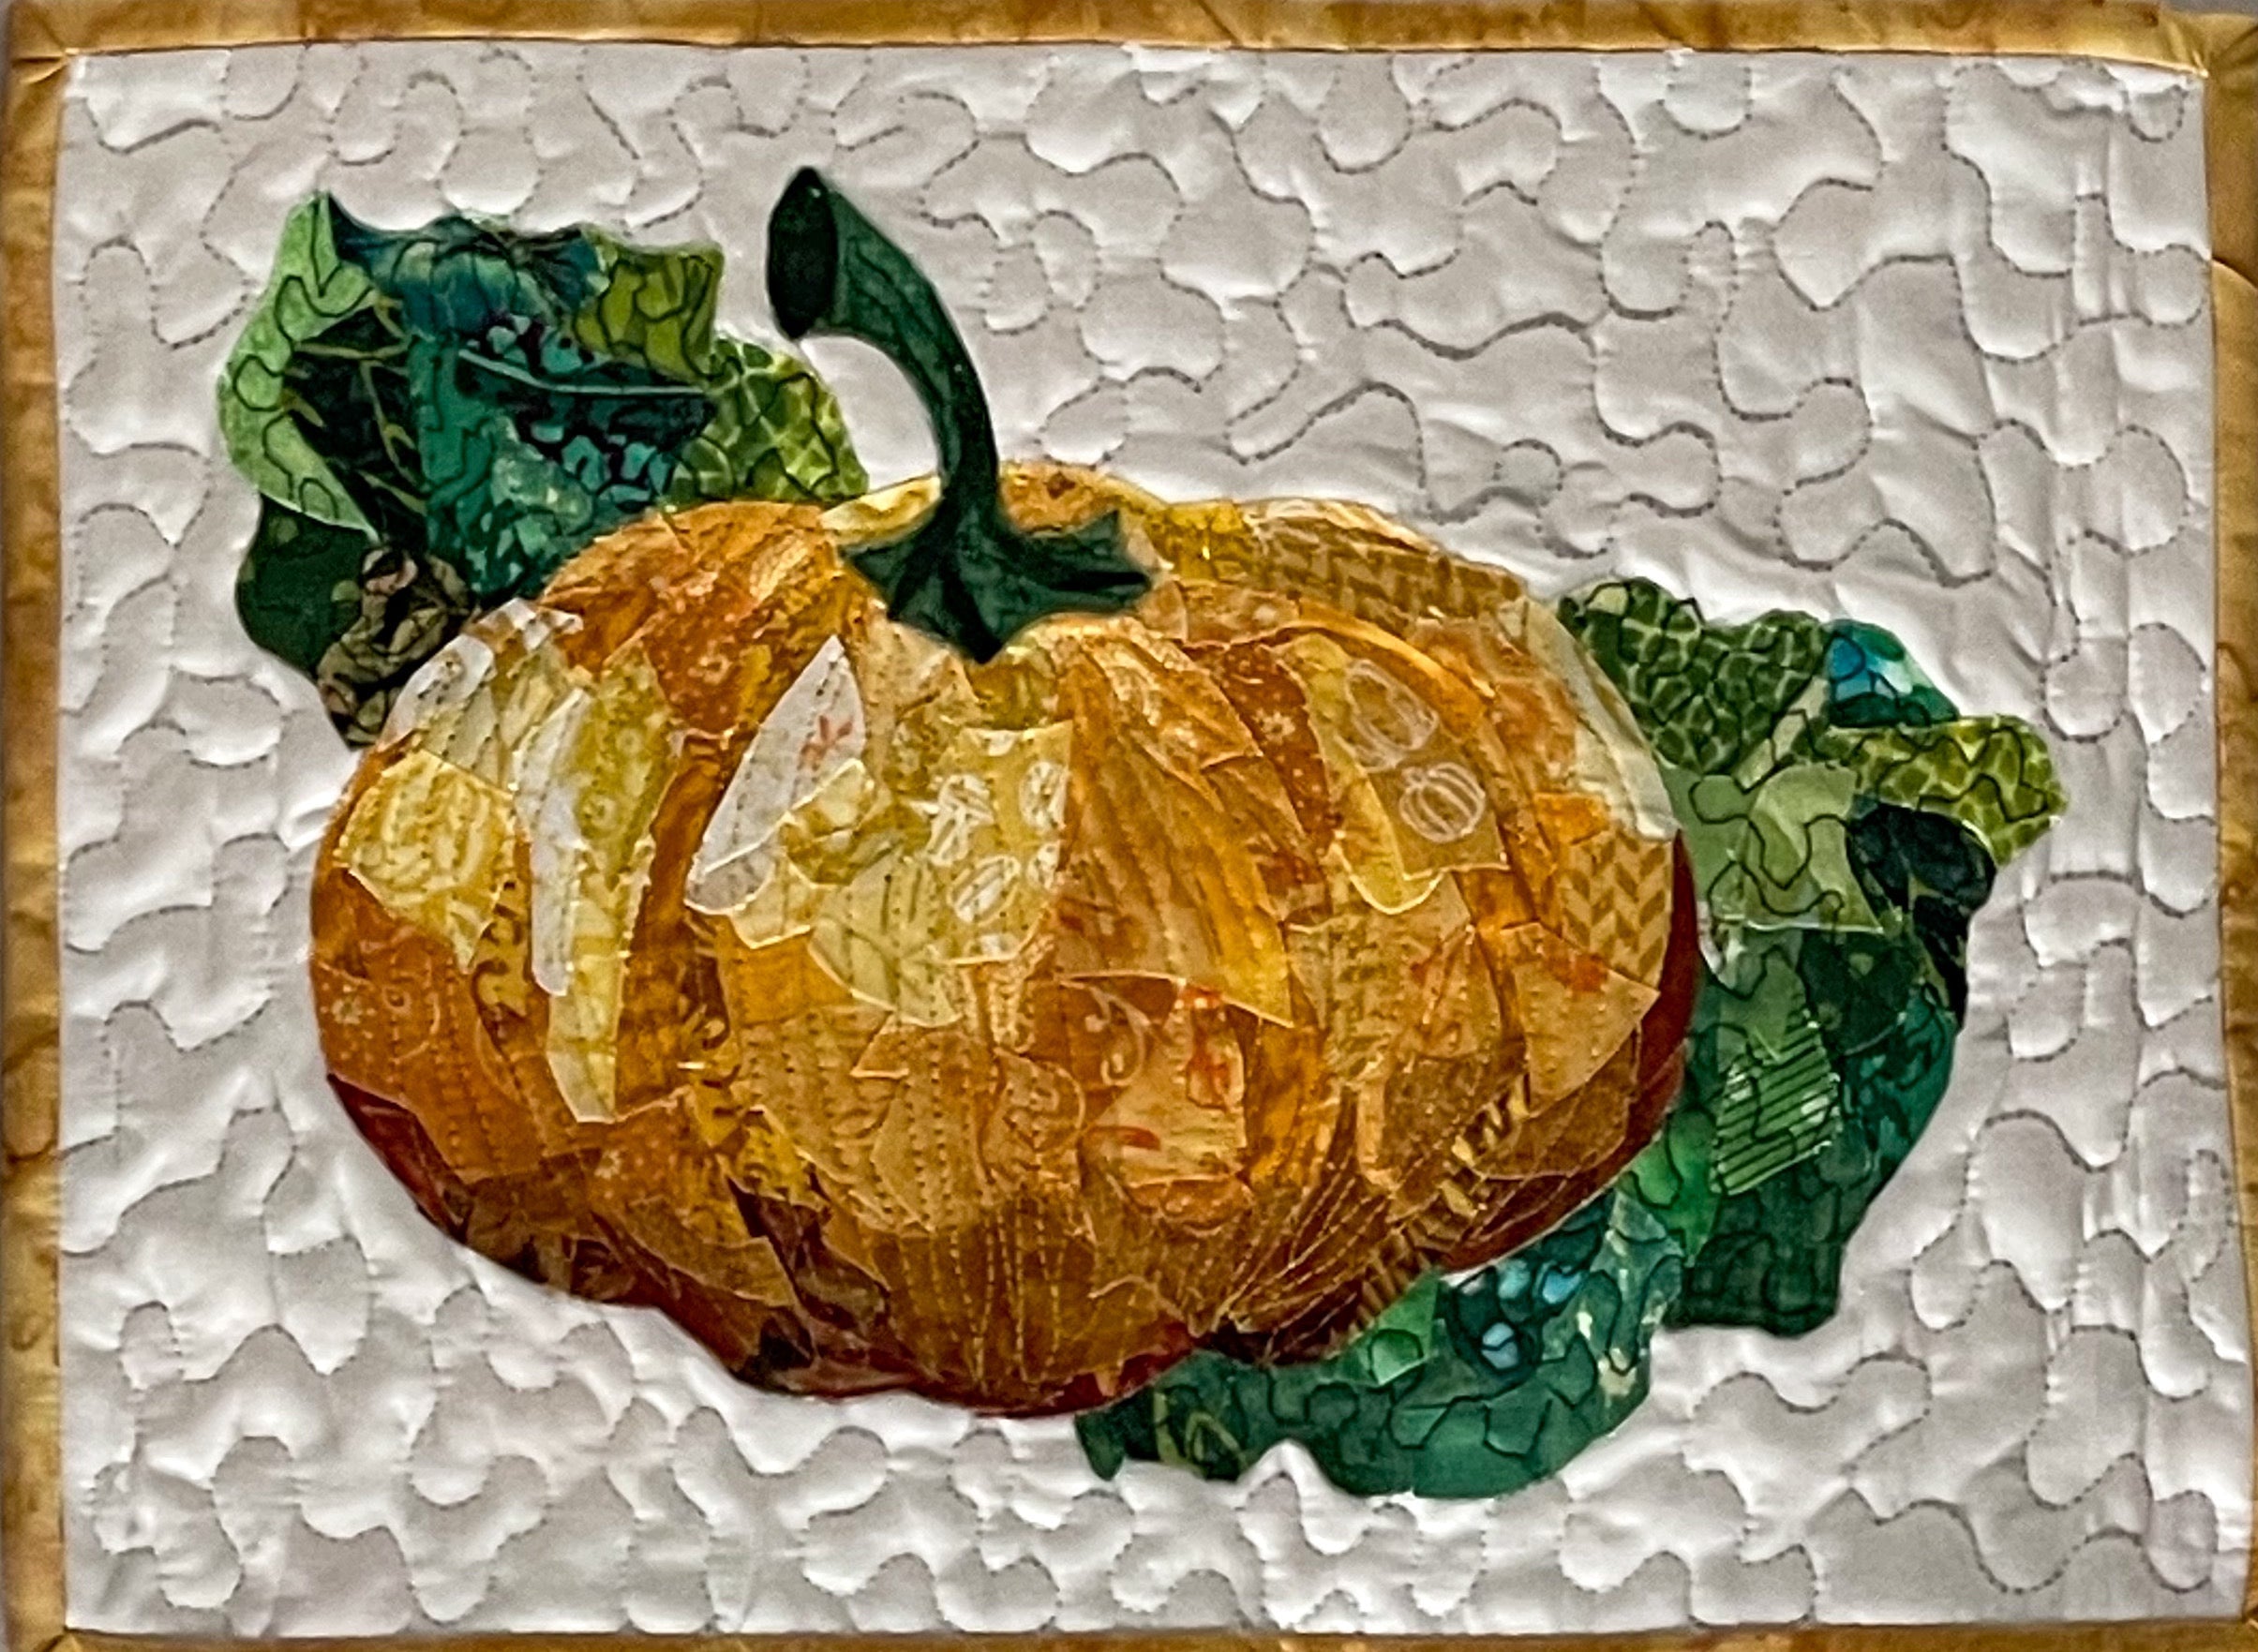 Saturday 11/4/2023 9:30 a.m. Introduction to Collage Quilting Class: Single Pumpkin & Vine